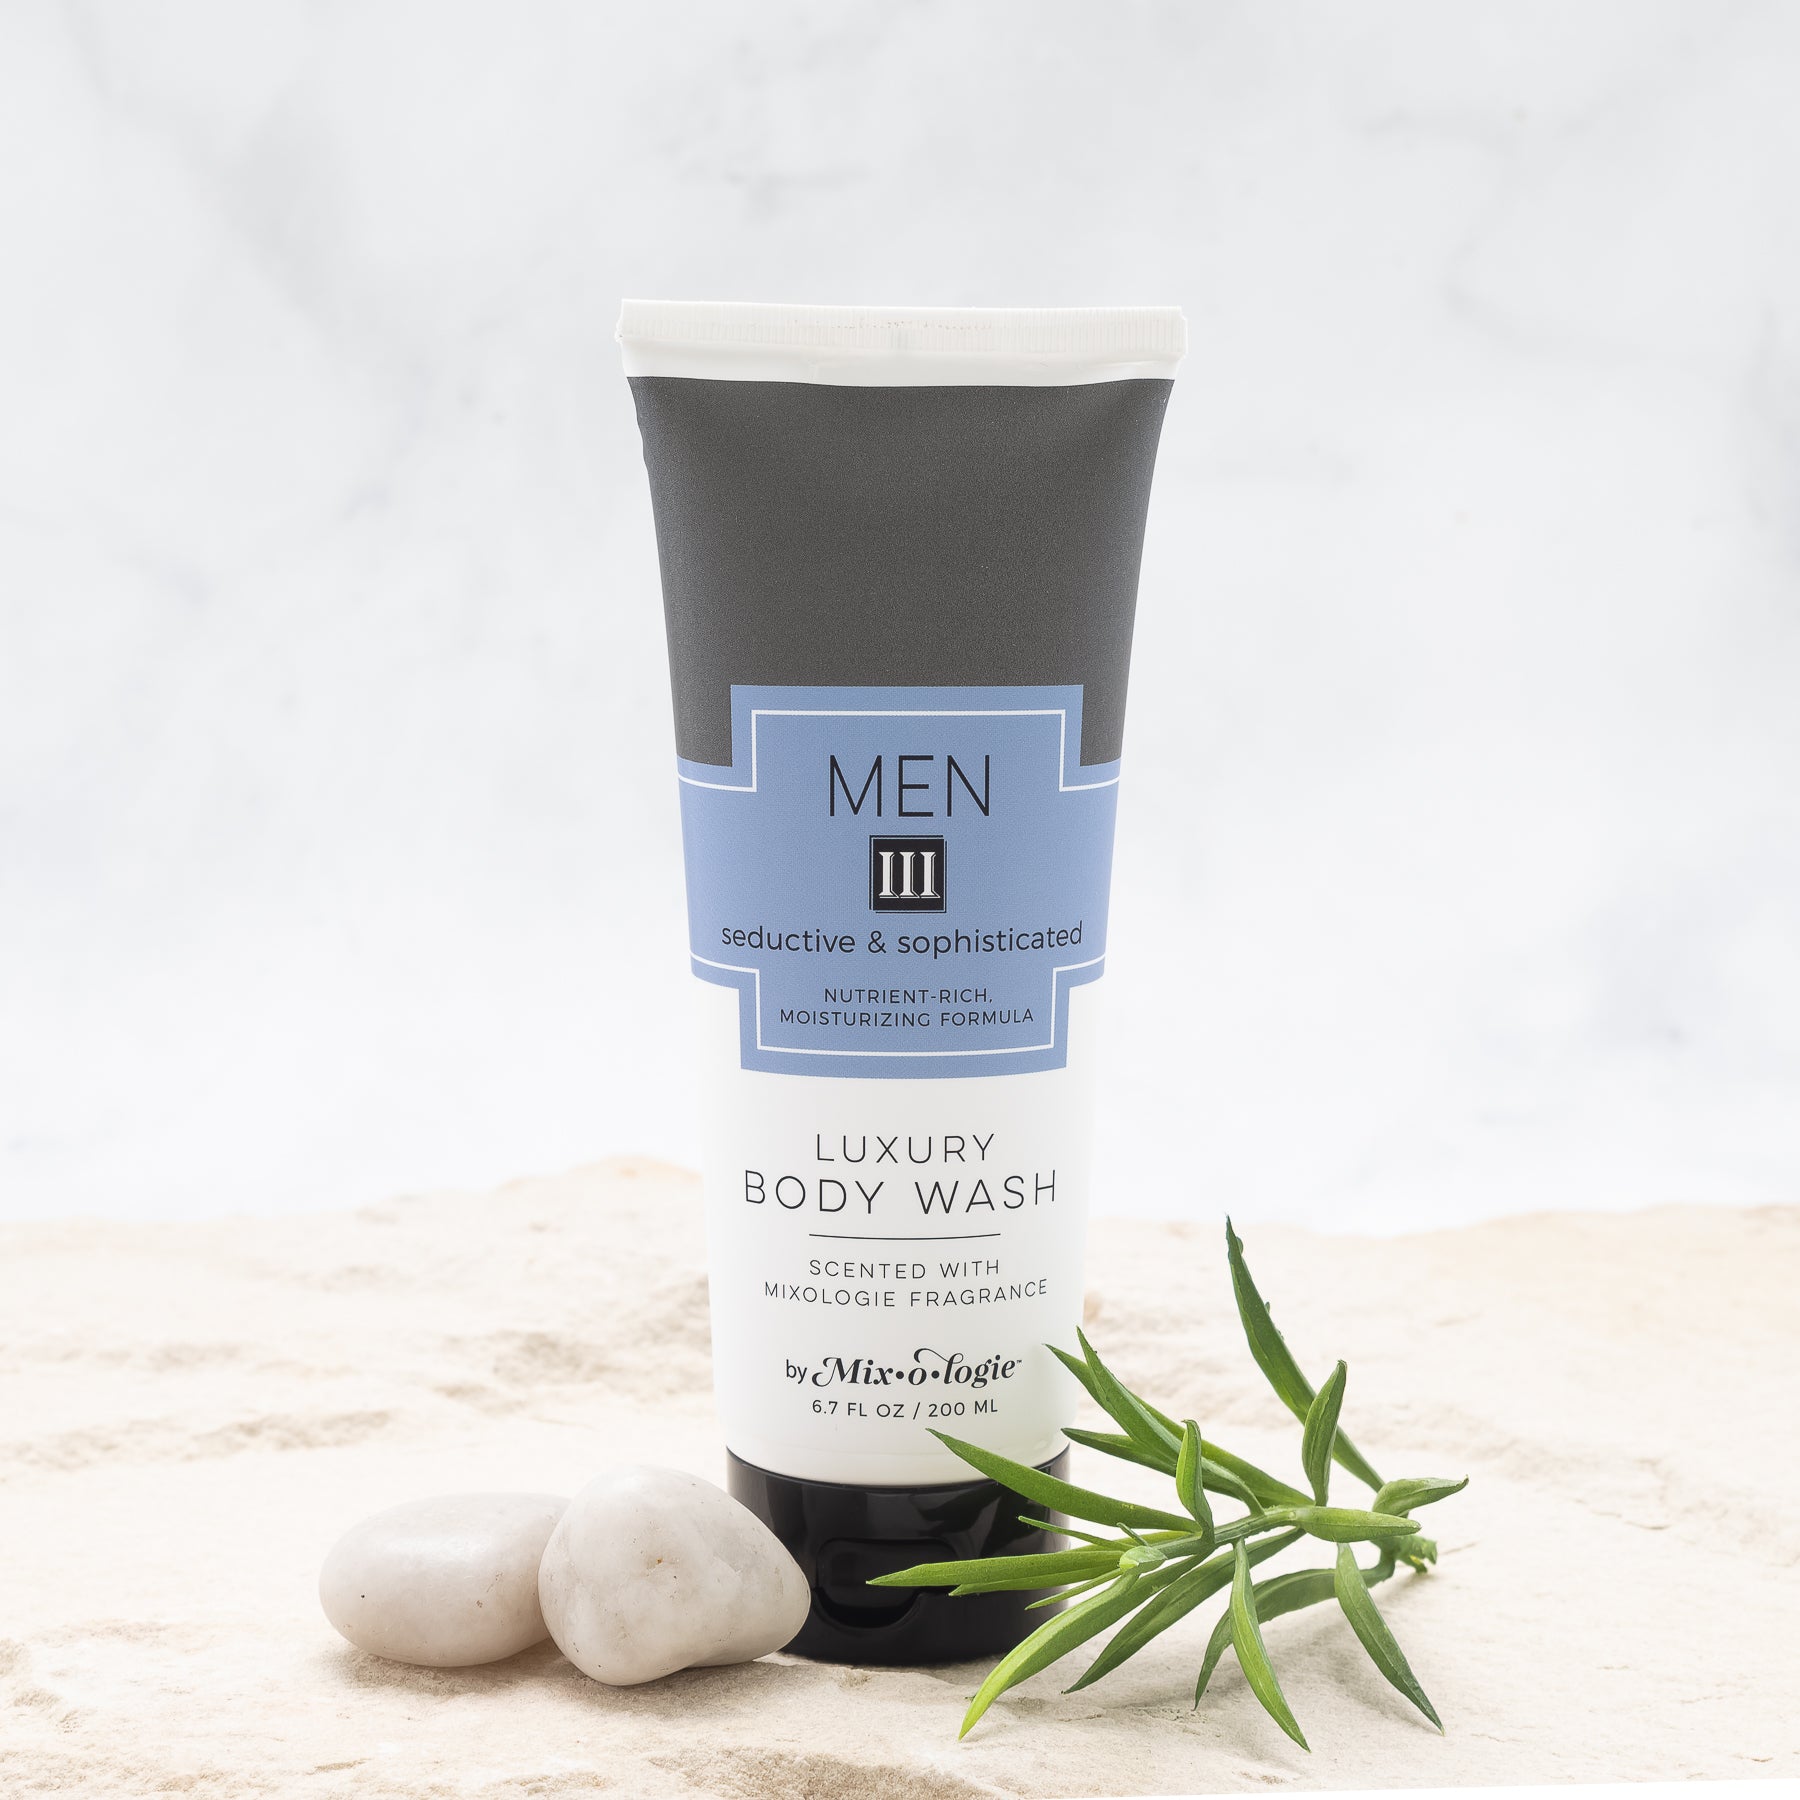 Luxury Body Wash in Men III (Seductive & Sophisticated) in grey color package with blue label in sand with rocks and greenery.